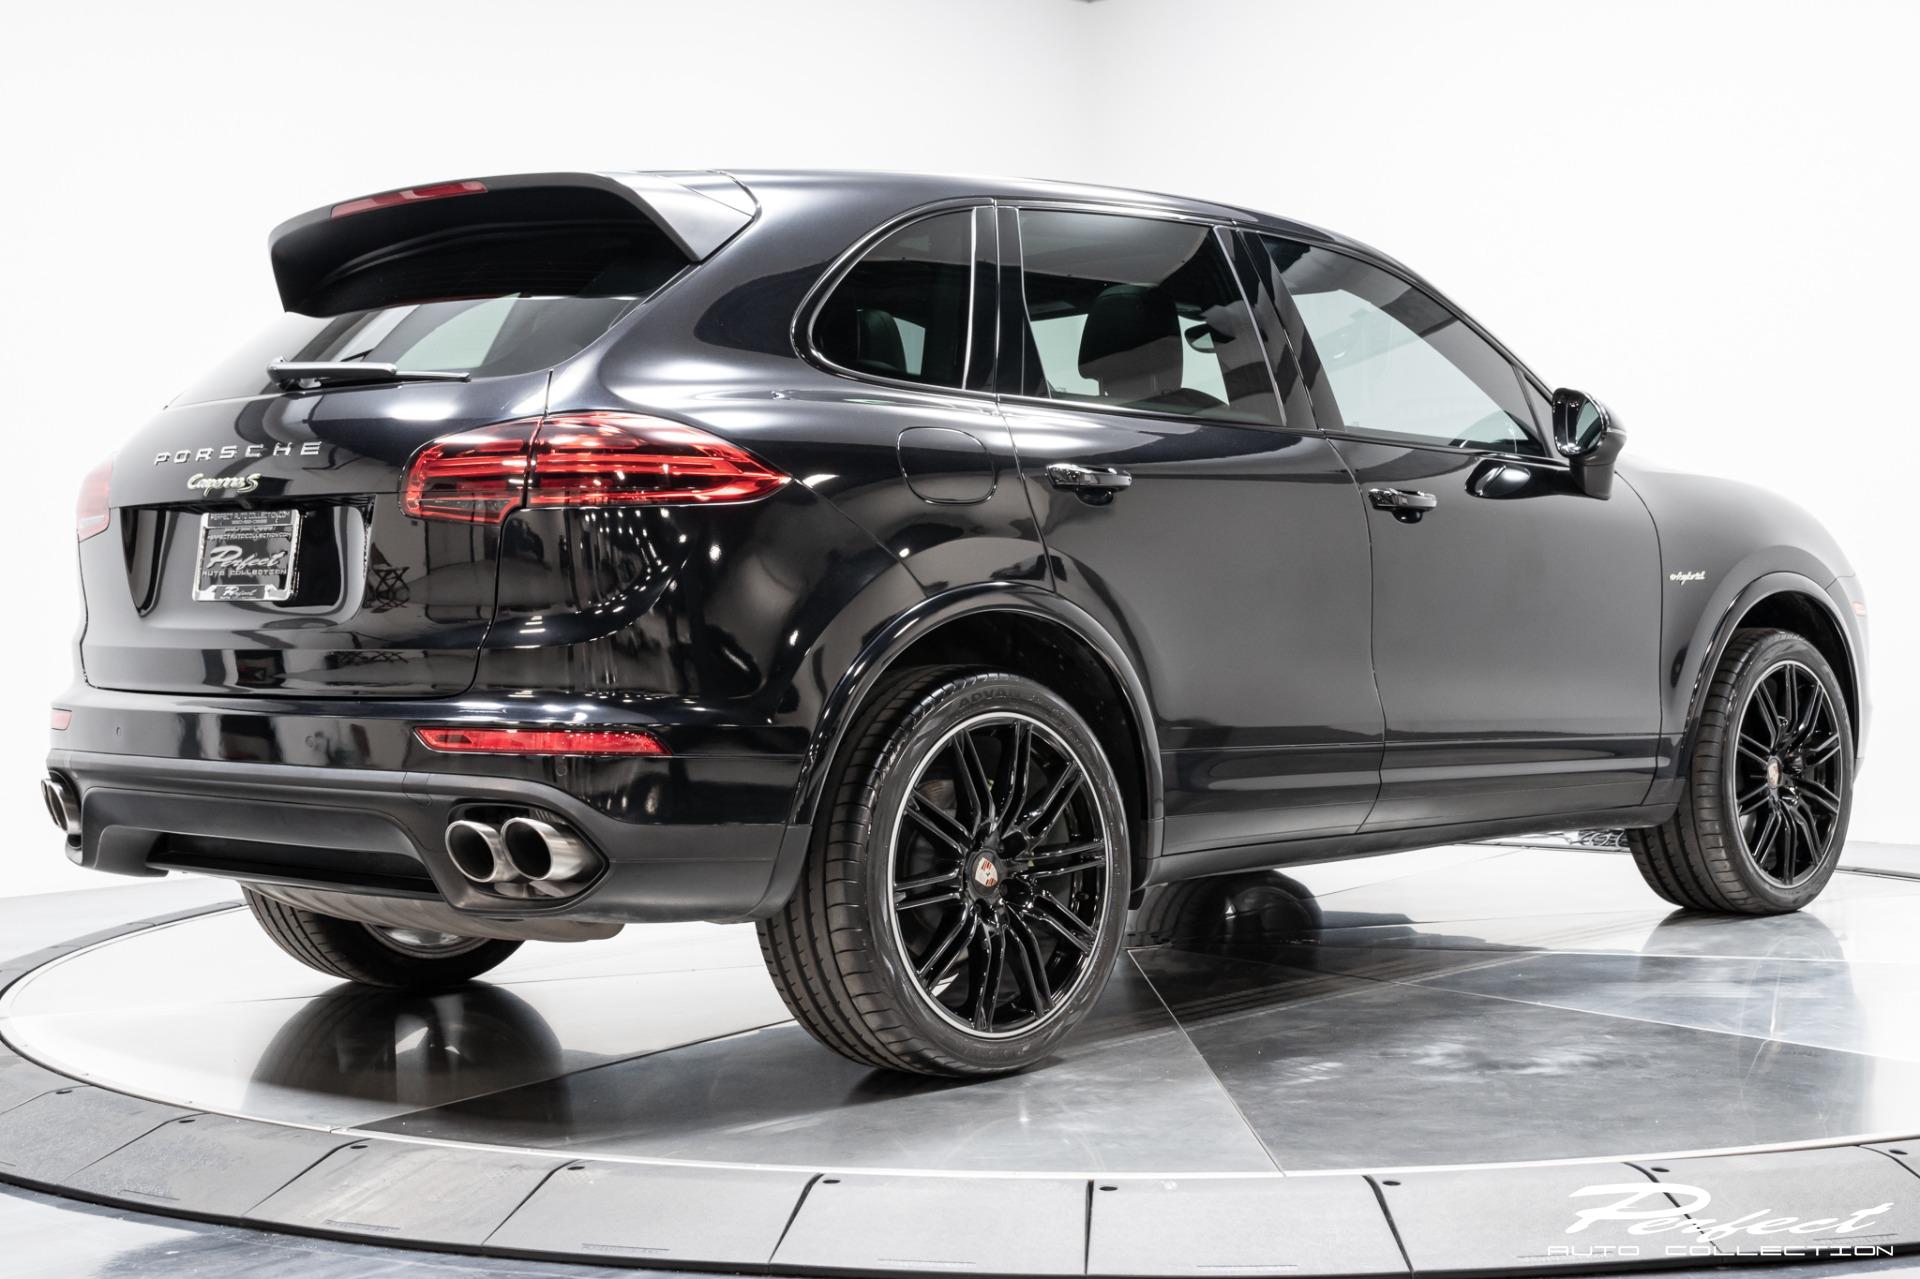 Used 2017 Porsche Cayenne S EHybrid For Sale (45,993